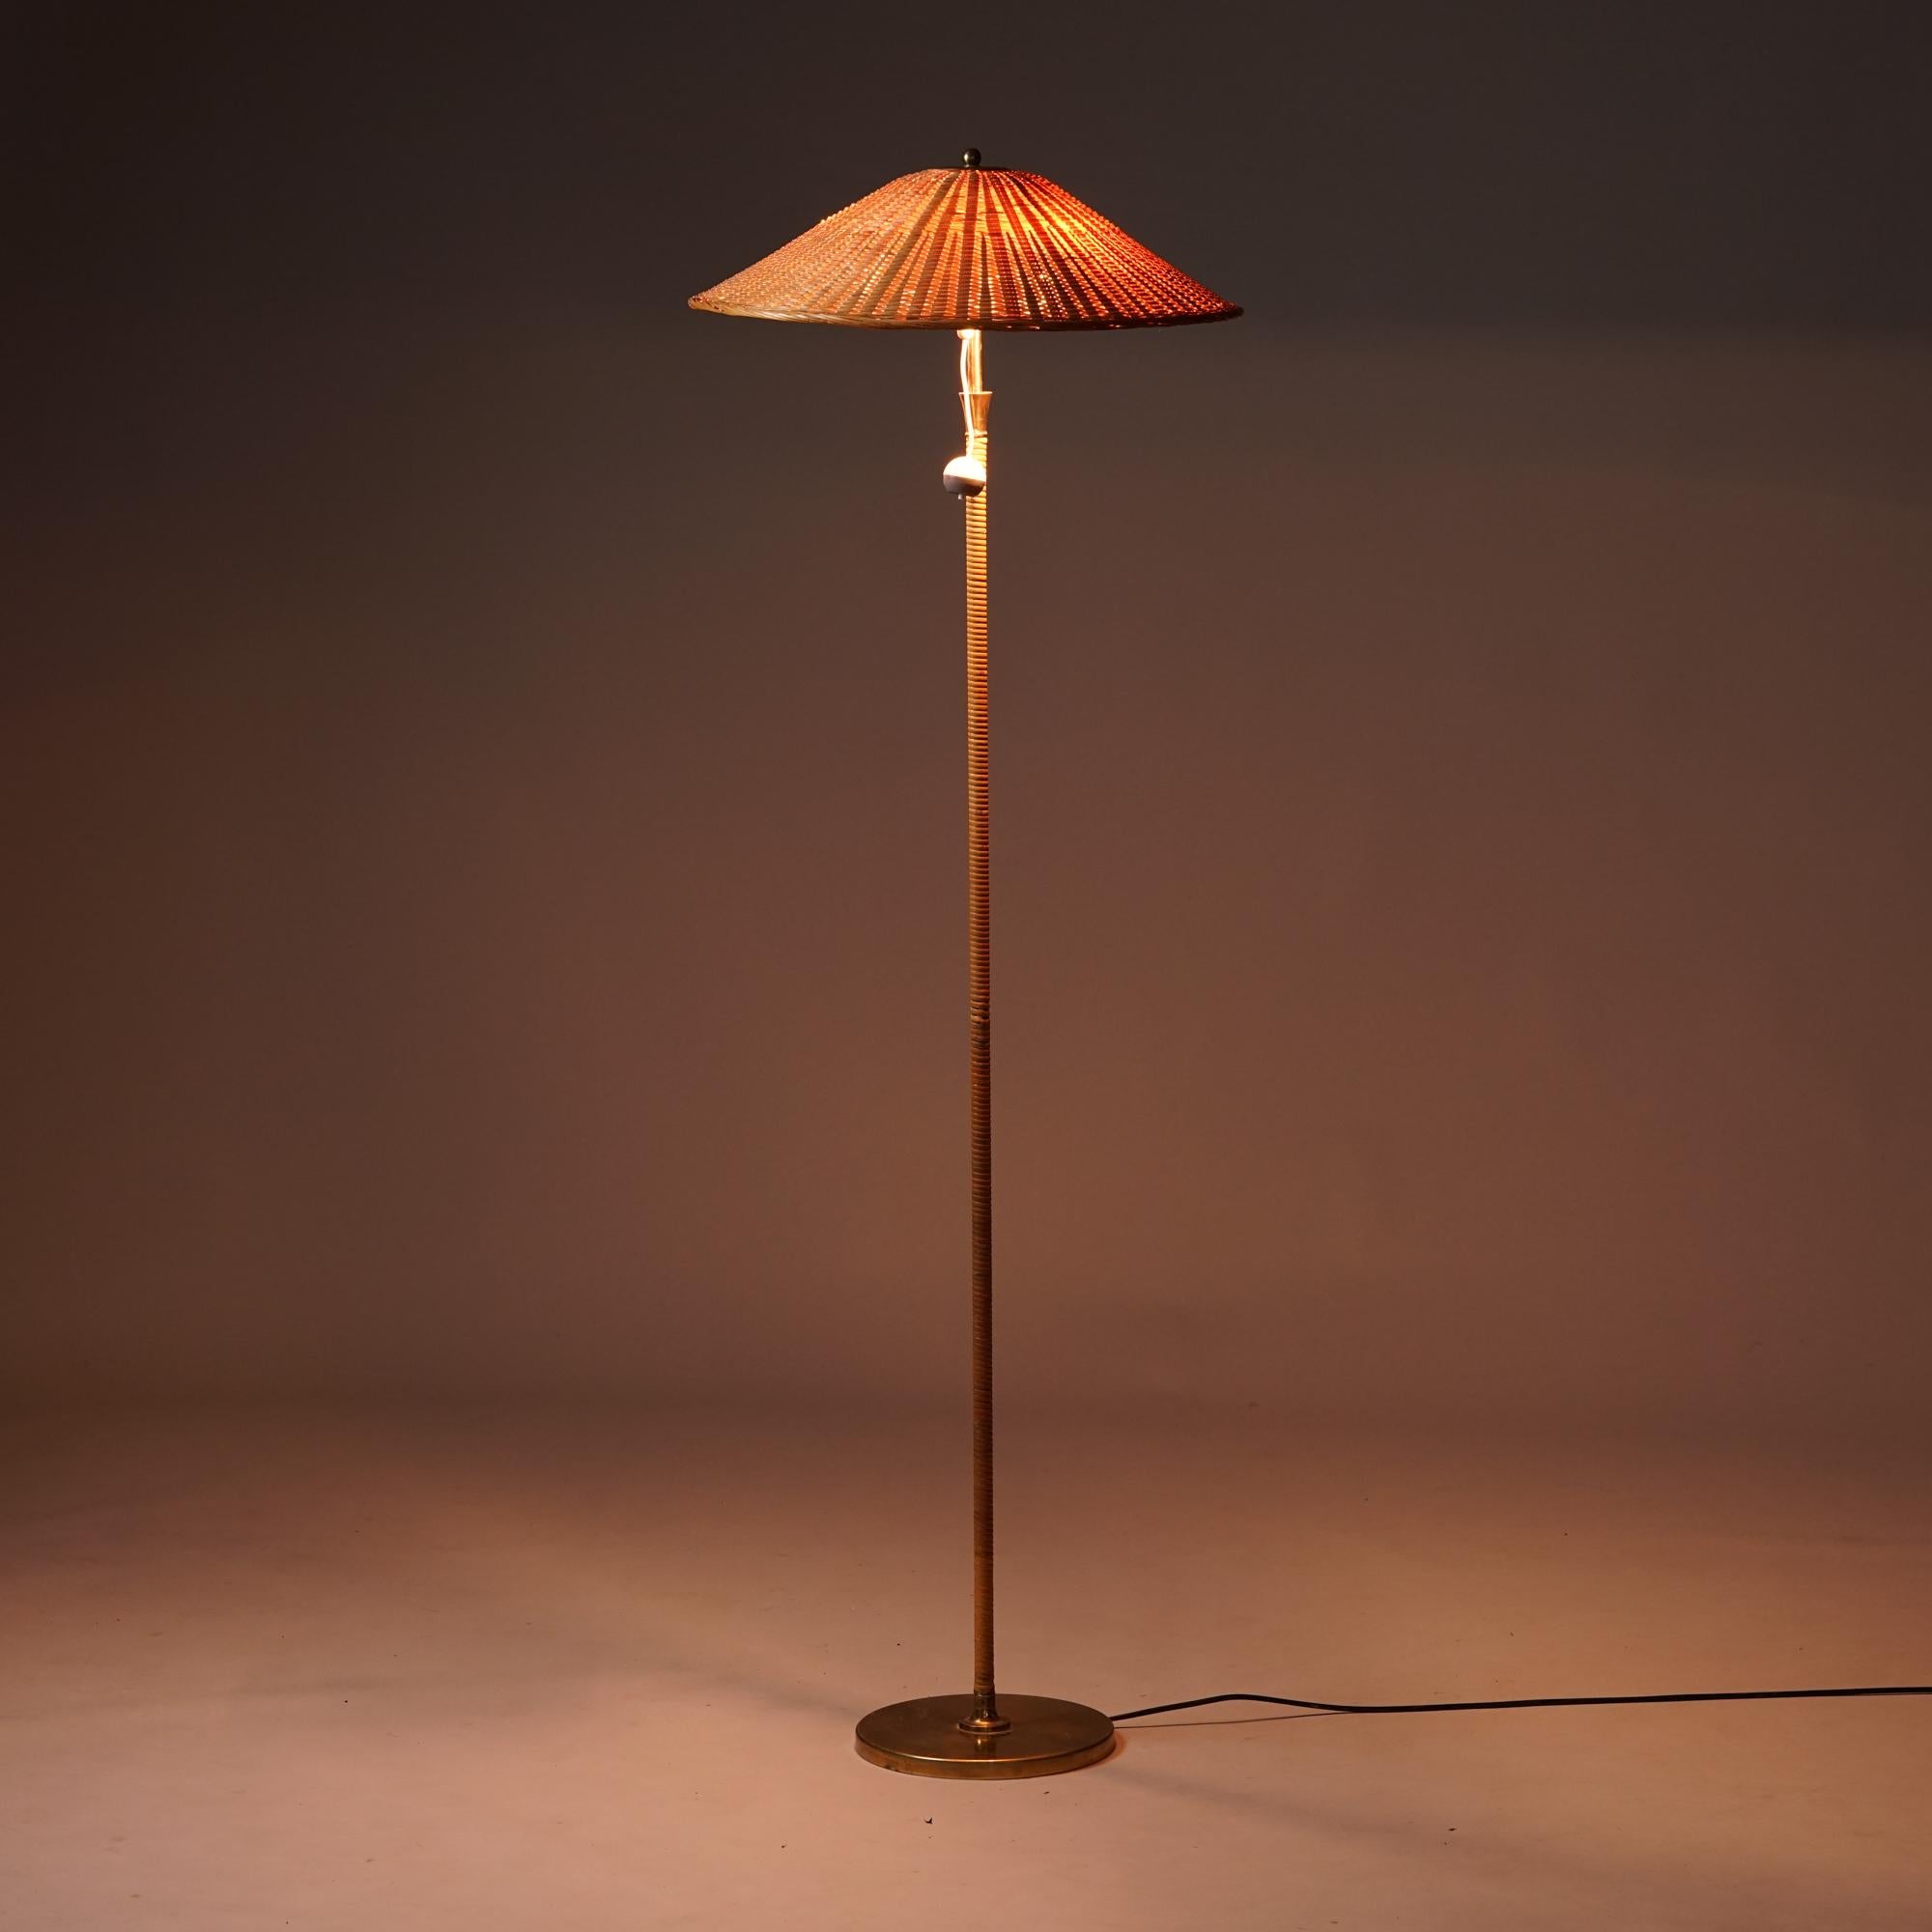 Rare mid-century modern floor lamp manufactured by Itsu in the 1950s. Brass details, rattan shade, rattan-covered stem. Good original condition, beautiful patina on the brass details. Rattan shade has been changed later. The shade is vintage.